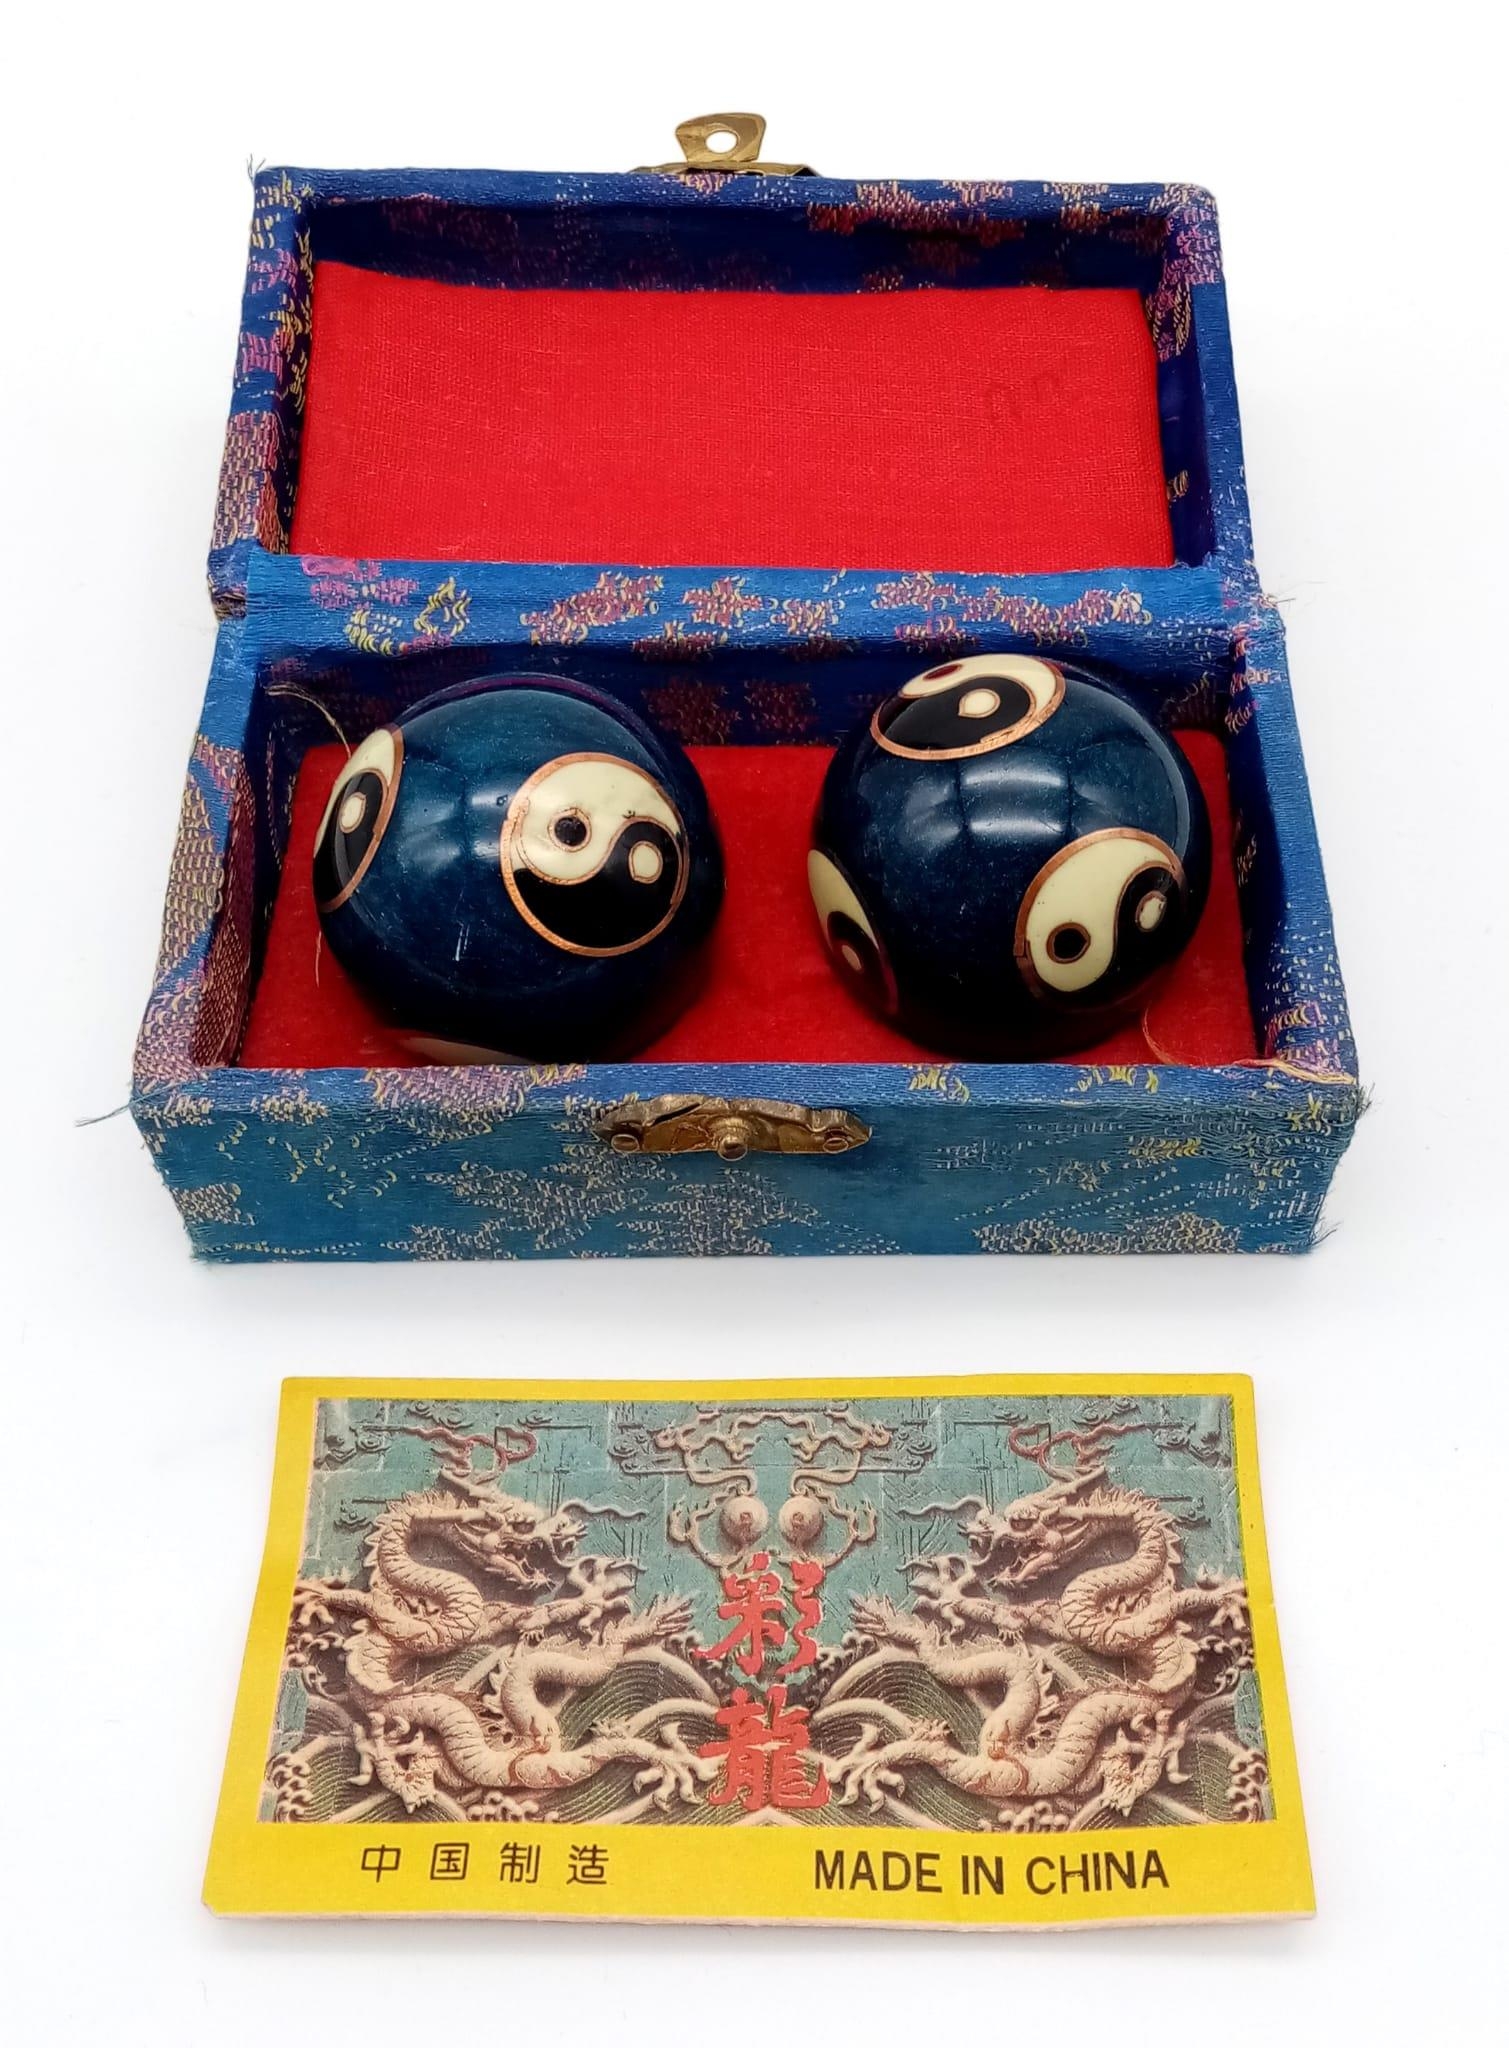 A PAIR OF YING AND YANG STRESS BALLS IN BOX - Image 6 of 7